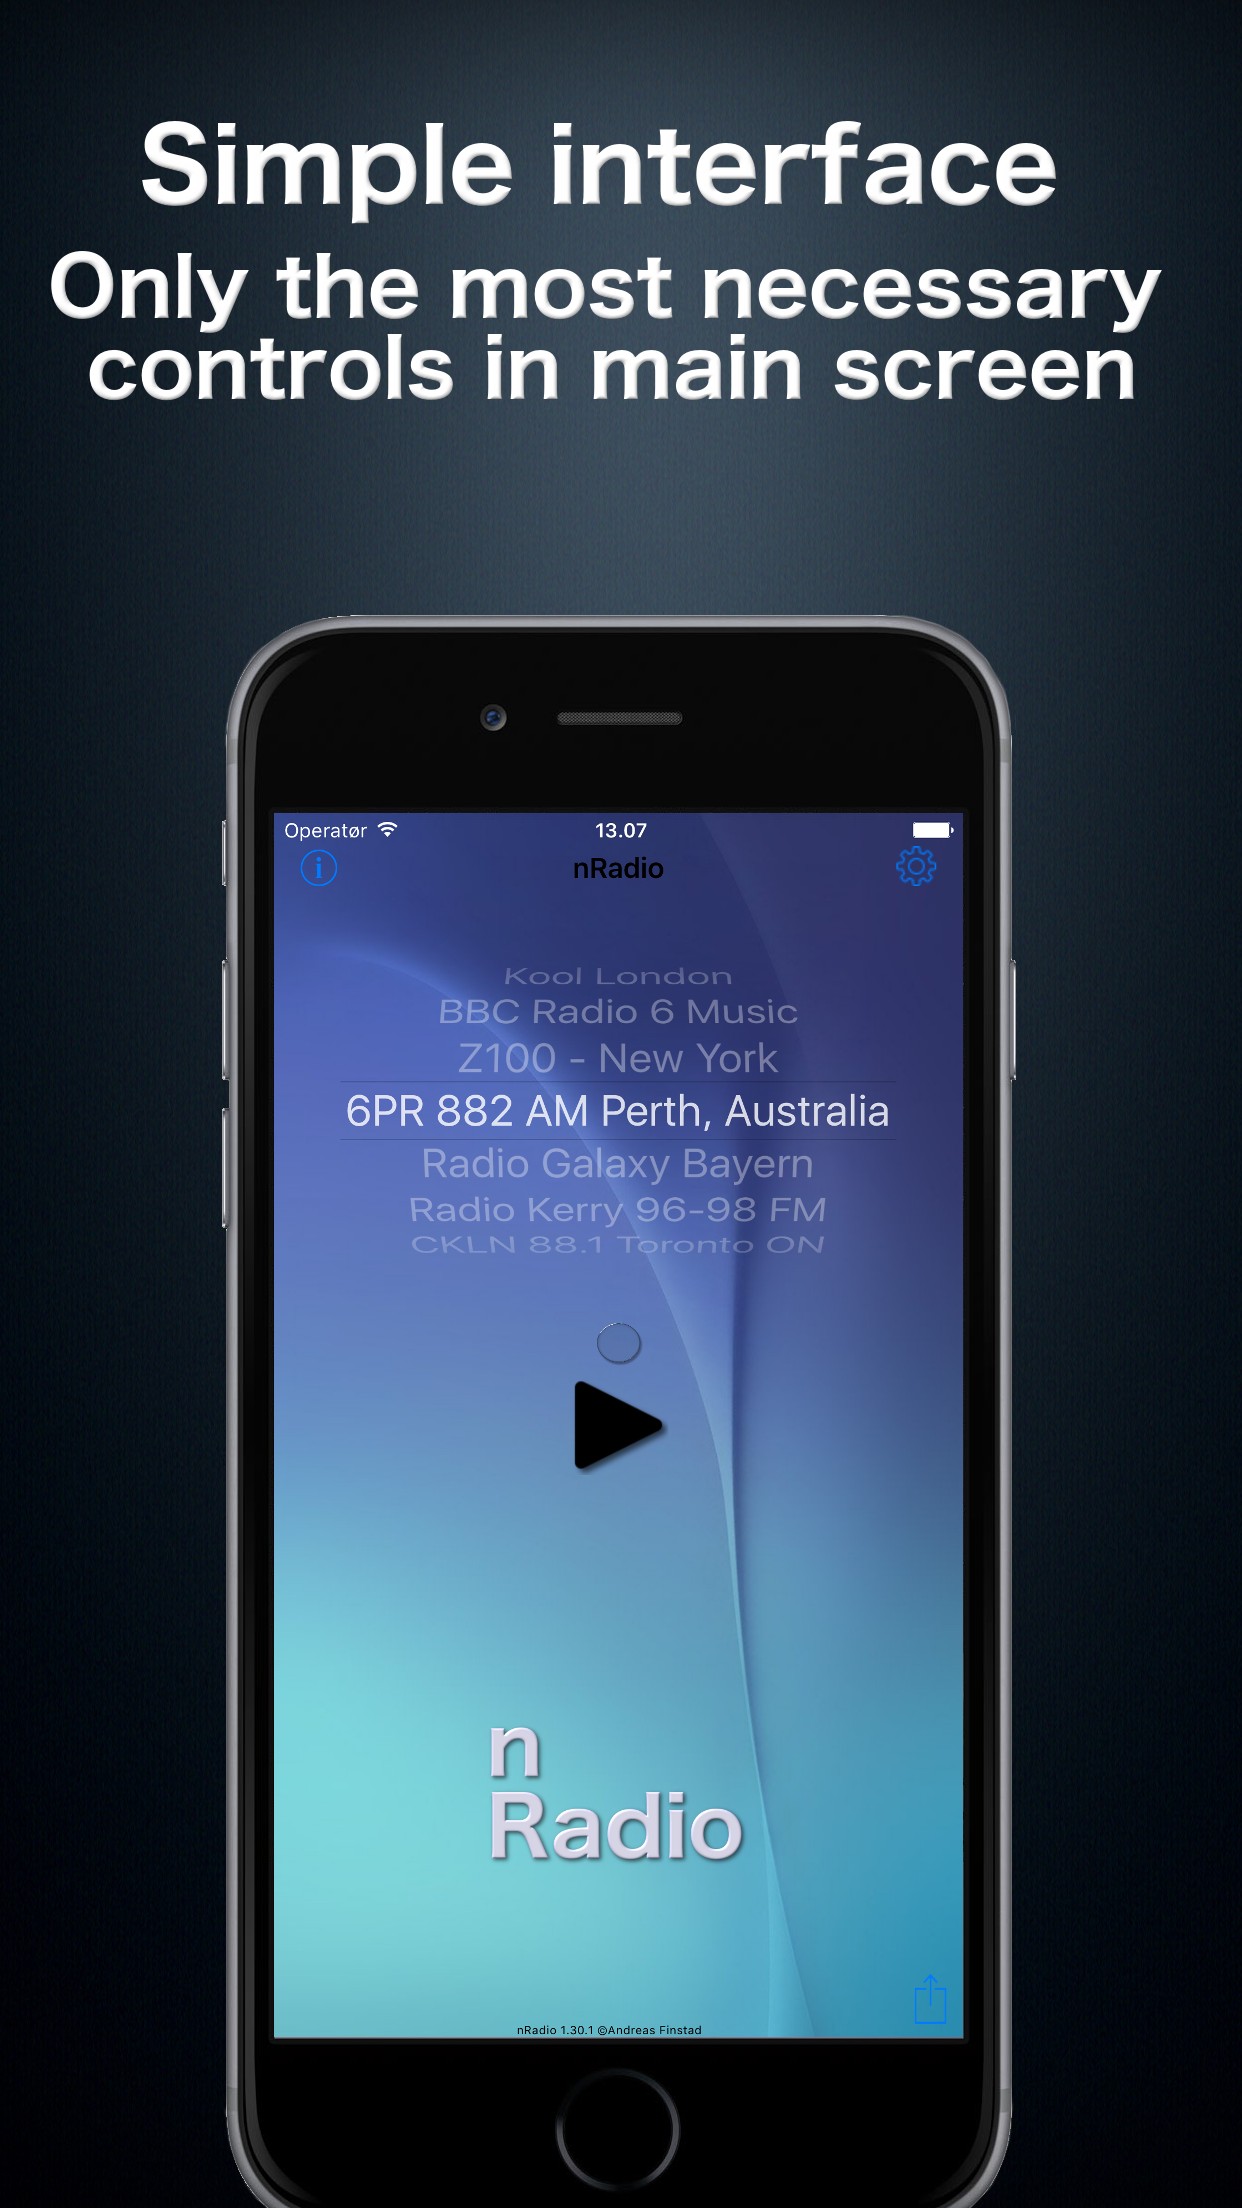 nRadio - Internet Radio: Listen to stations and music from all over the world